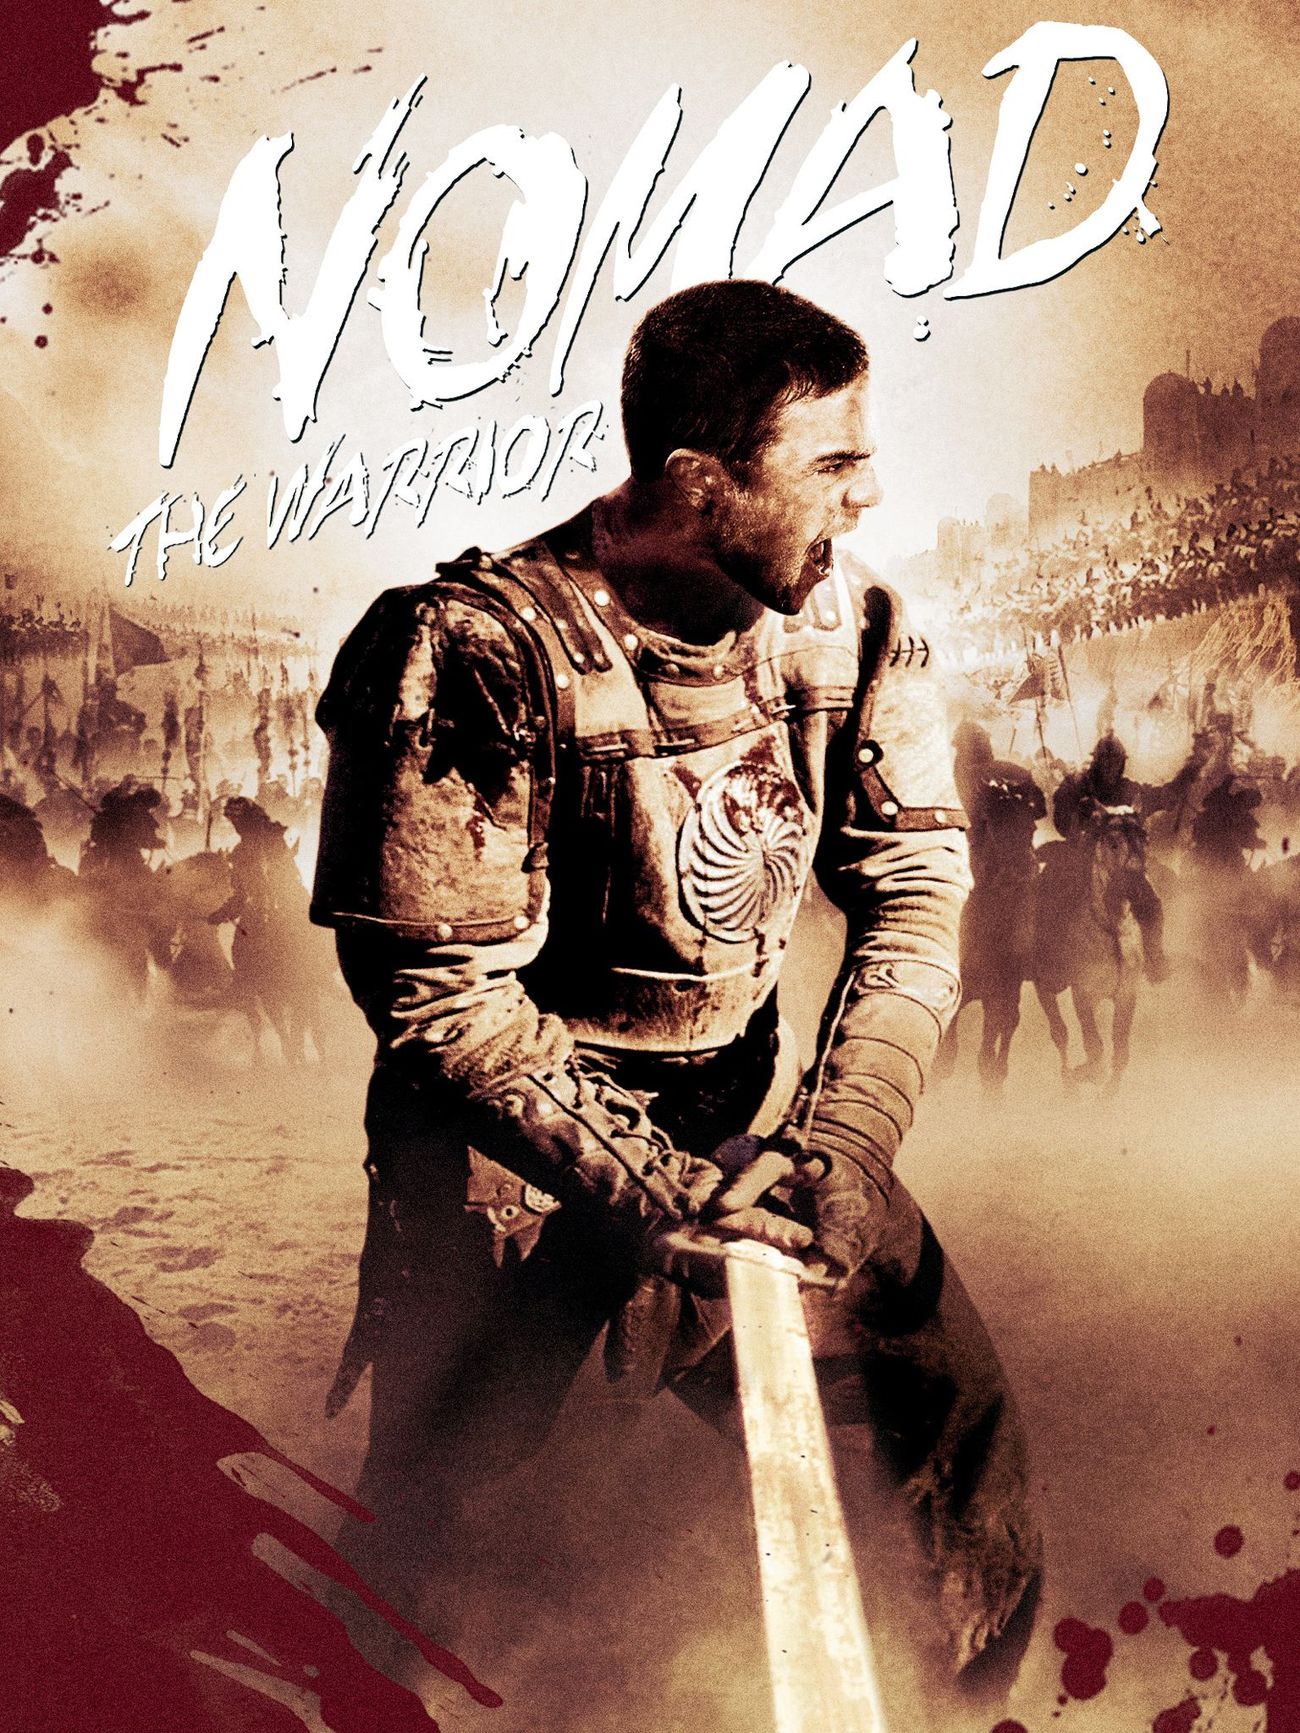 Nomad – The warrior (2005)